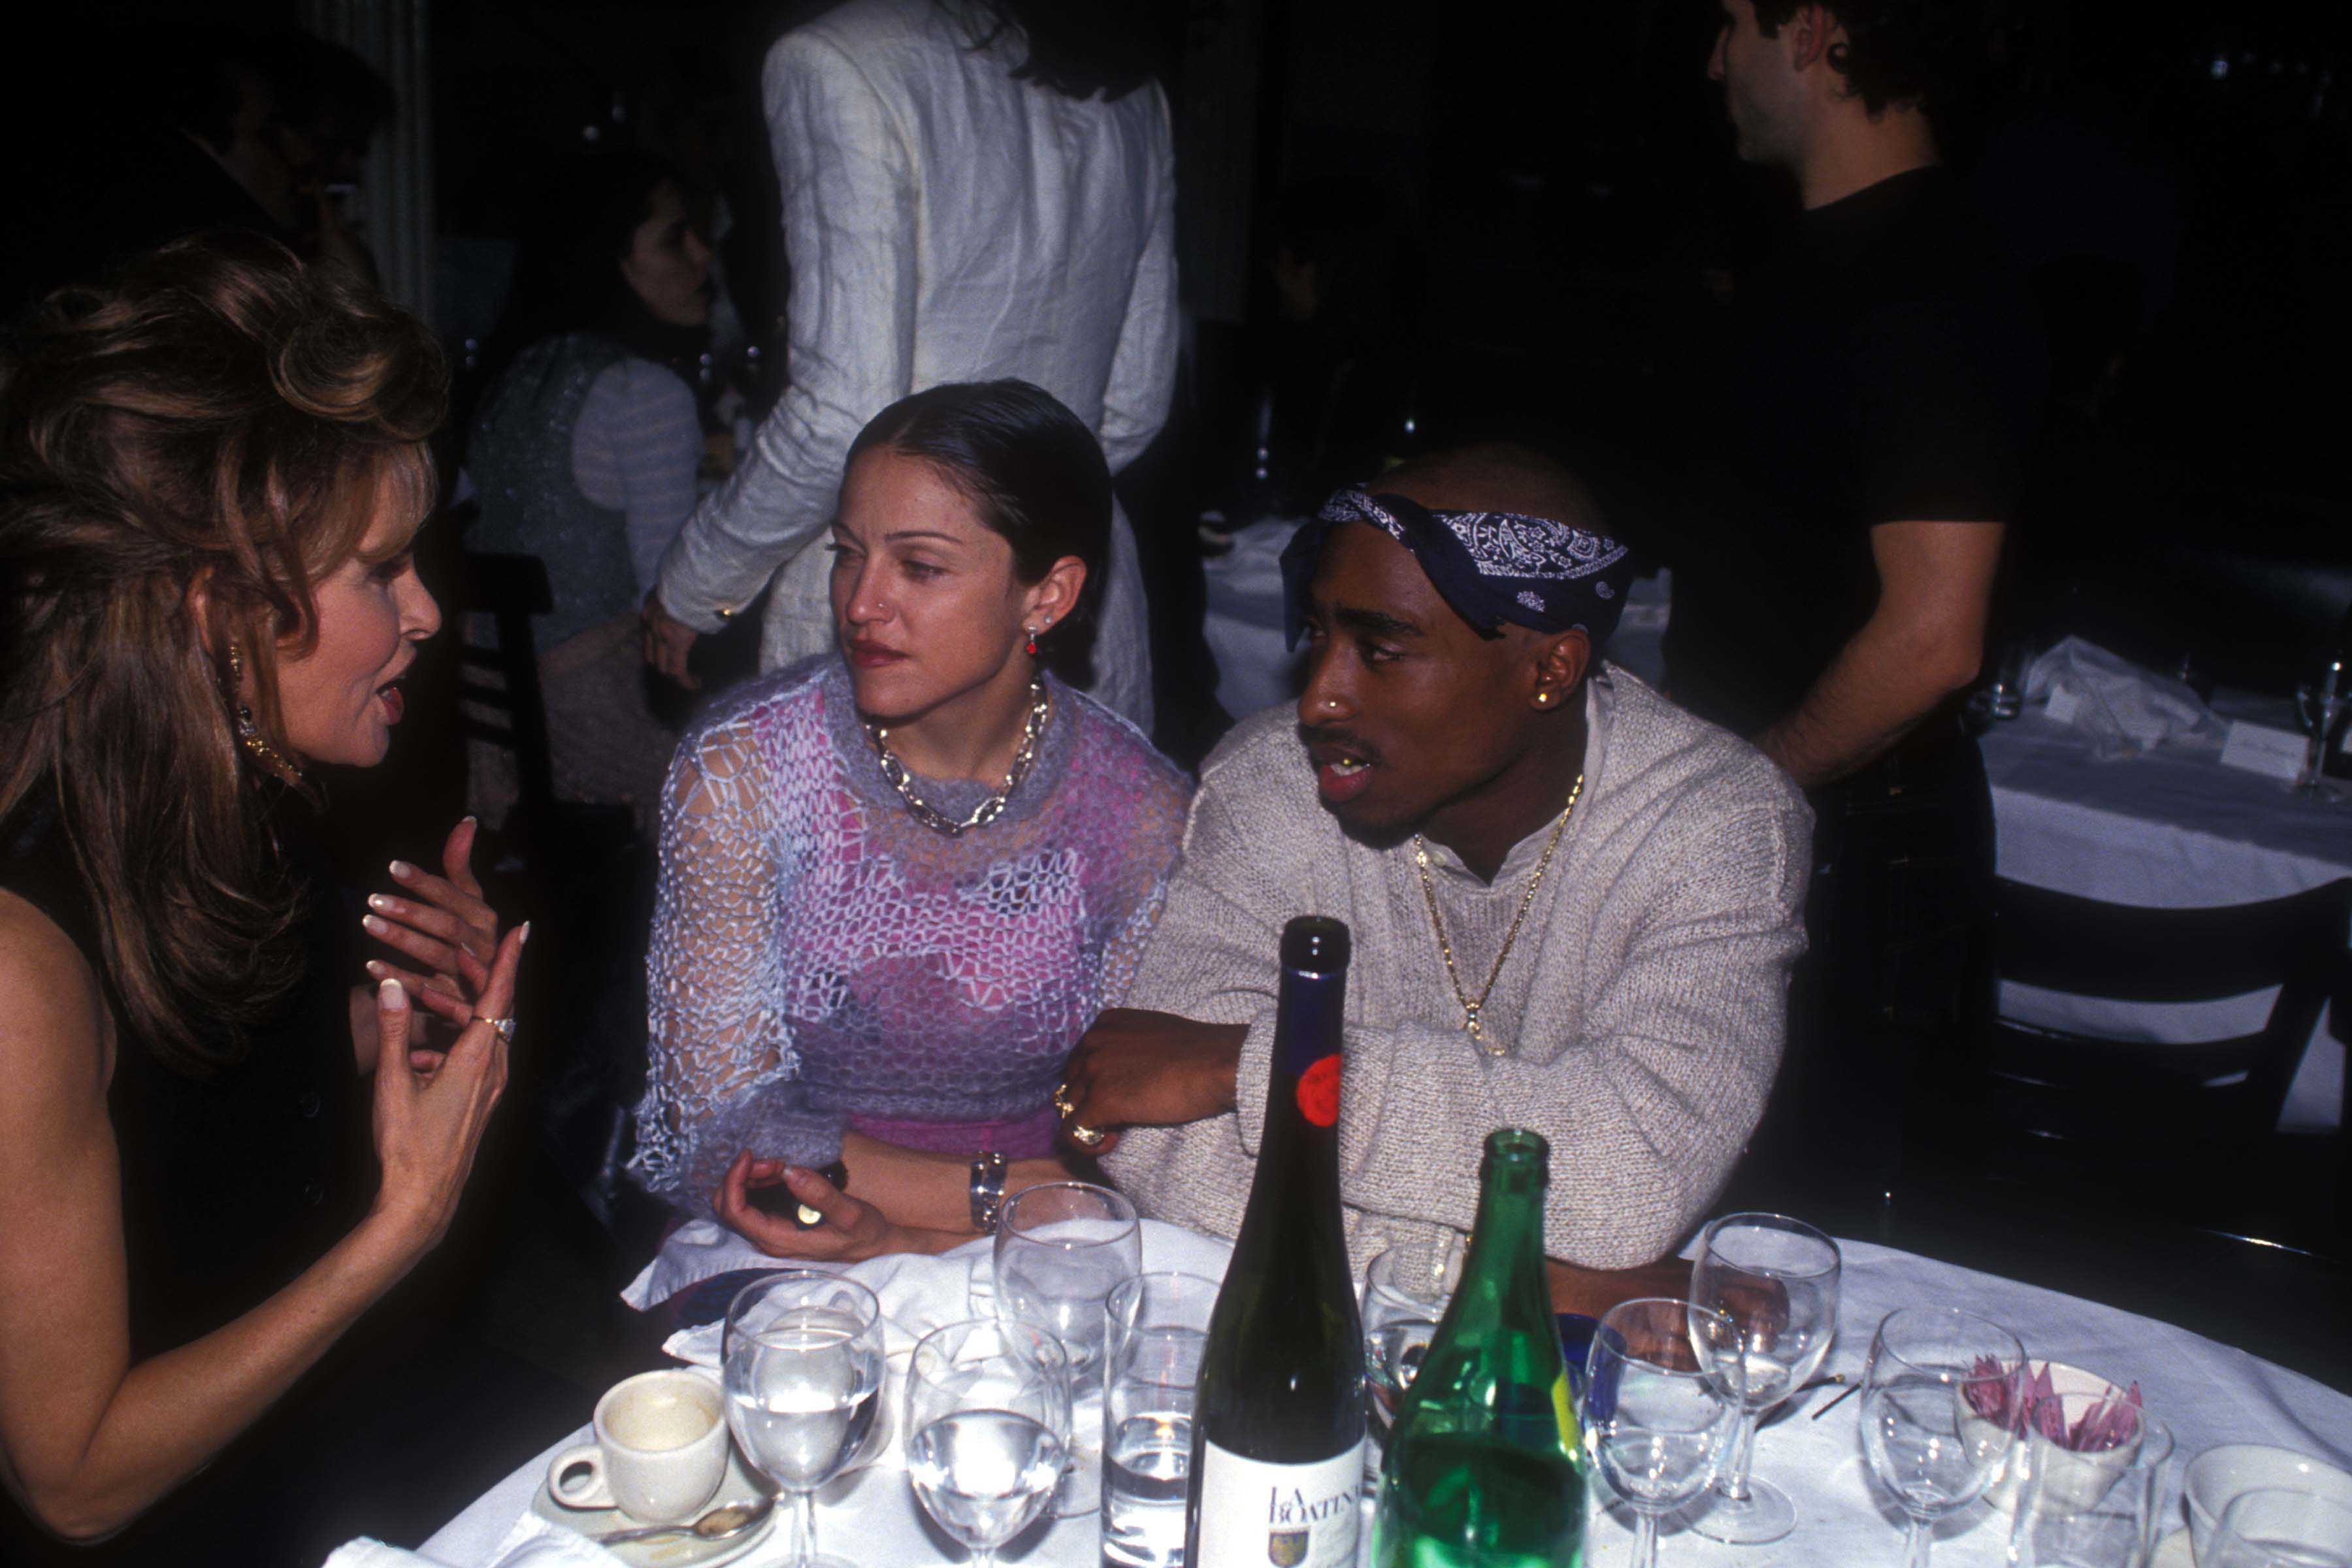 (L-R) Raquel Welch, Madonna and Tupac Shakur at the Interview Magazine party, March 1, 1994 in New York. (Patrick McMullan—Getty Images)